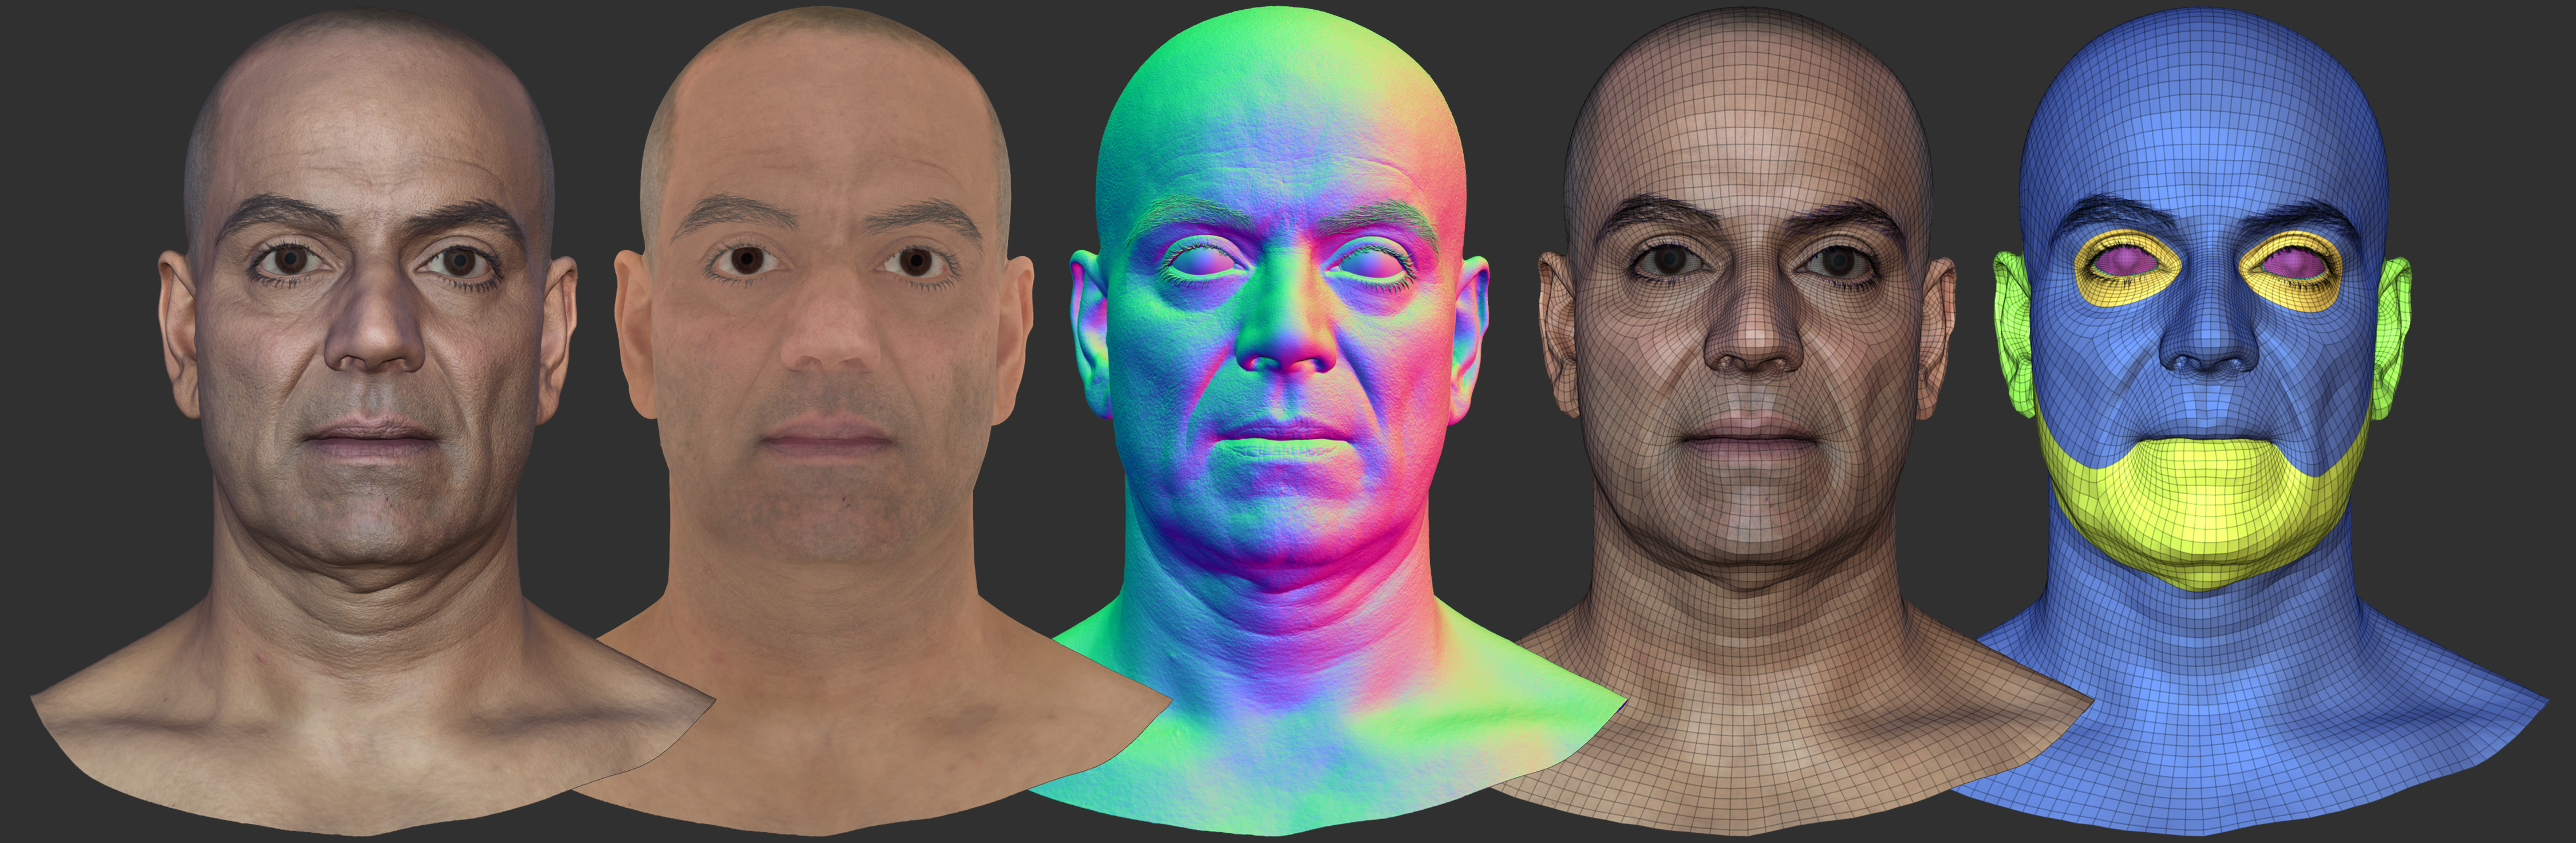 download zbrush human face texture maps 